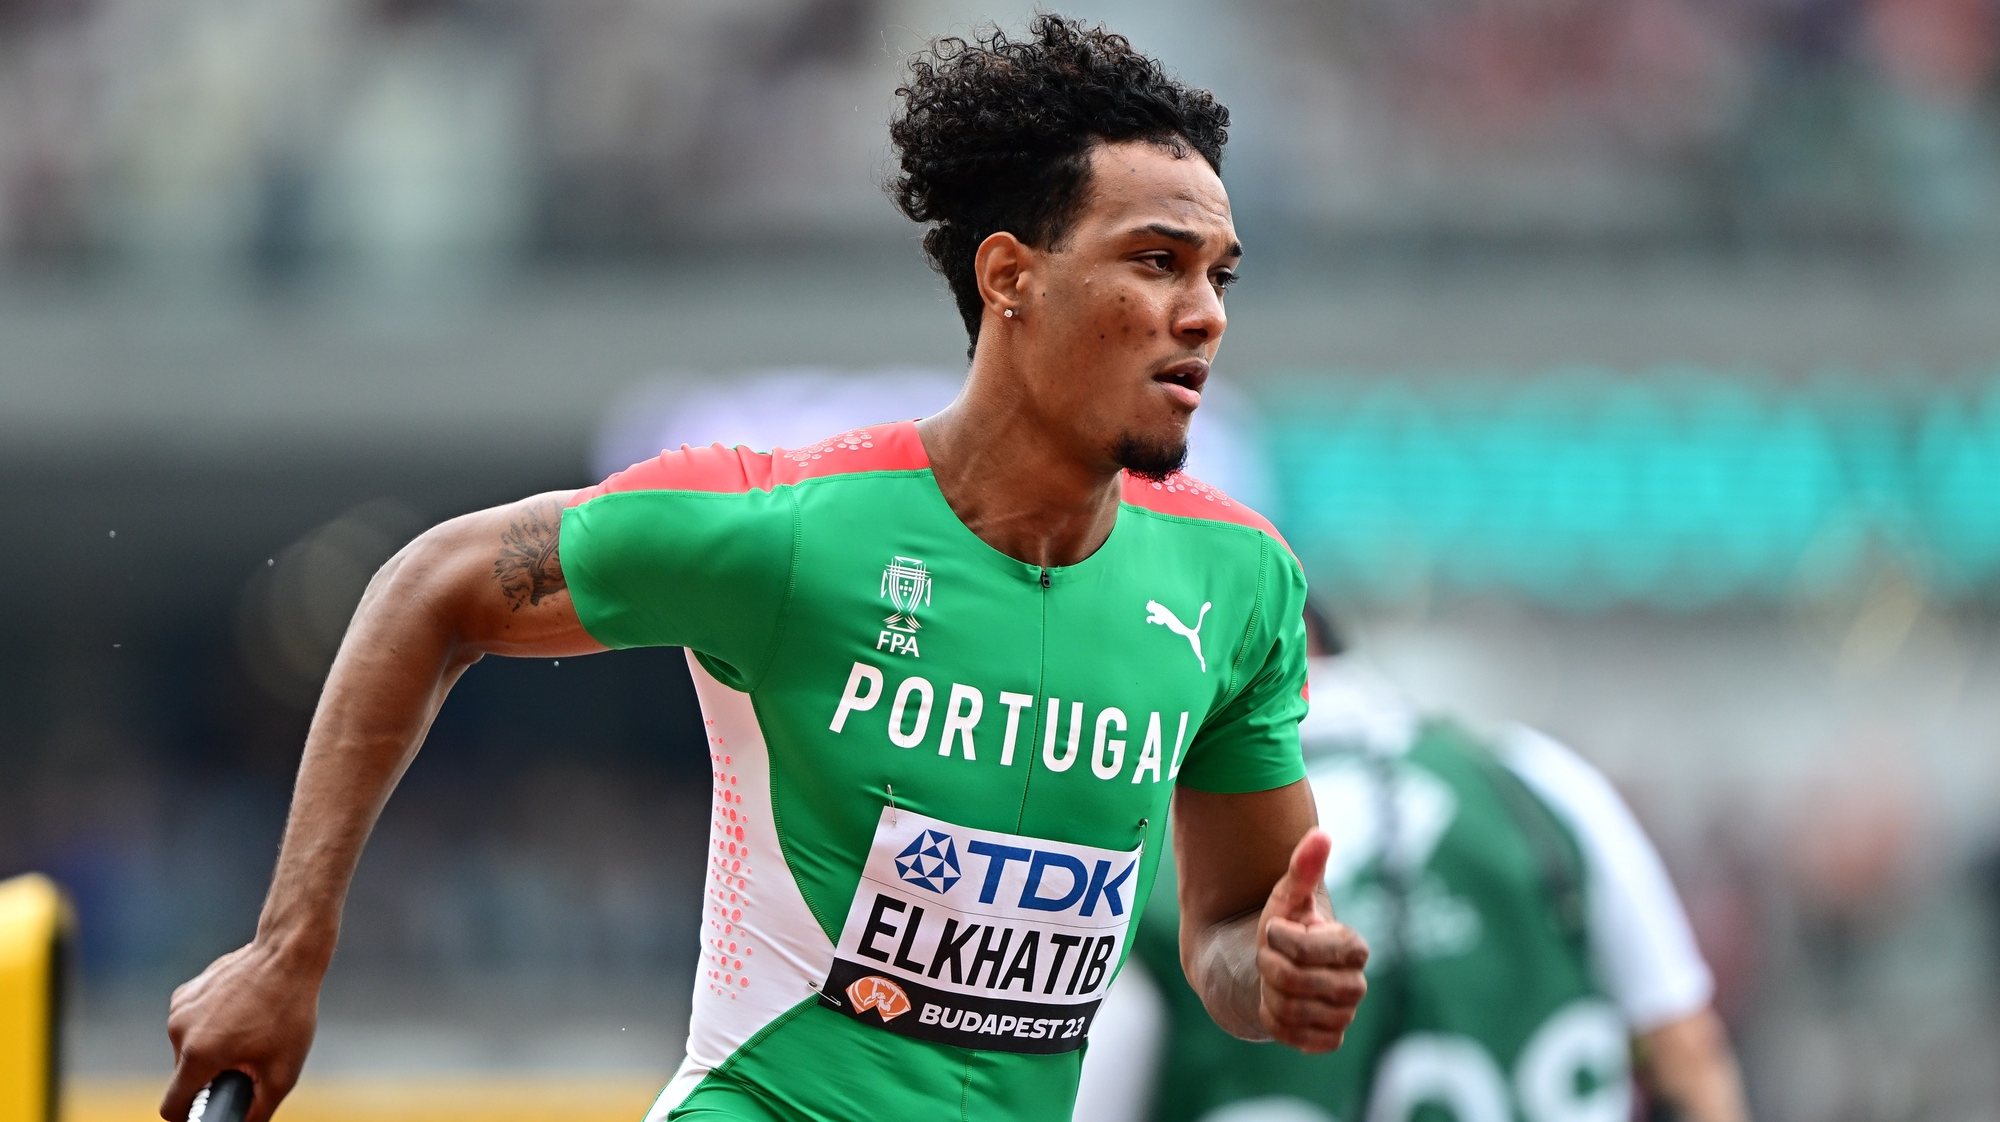 epa10806852 Omar Elkahatib of Portugal in action during the 4x400 Metres Relay Mixed Heat 1 competition of the World Athletics Championships in Budapest, Hungary, 19 August 2023.  EPA/CHRISTIAN BRUNA